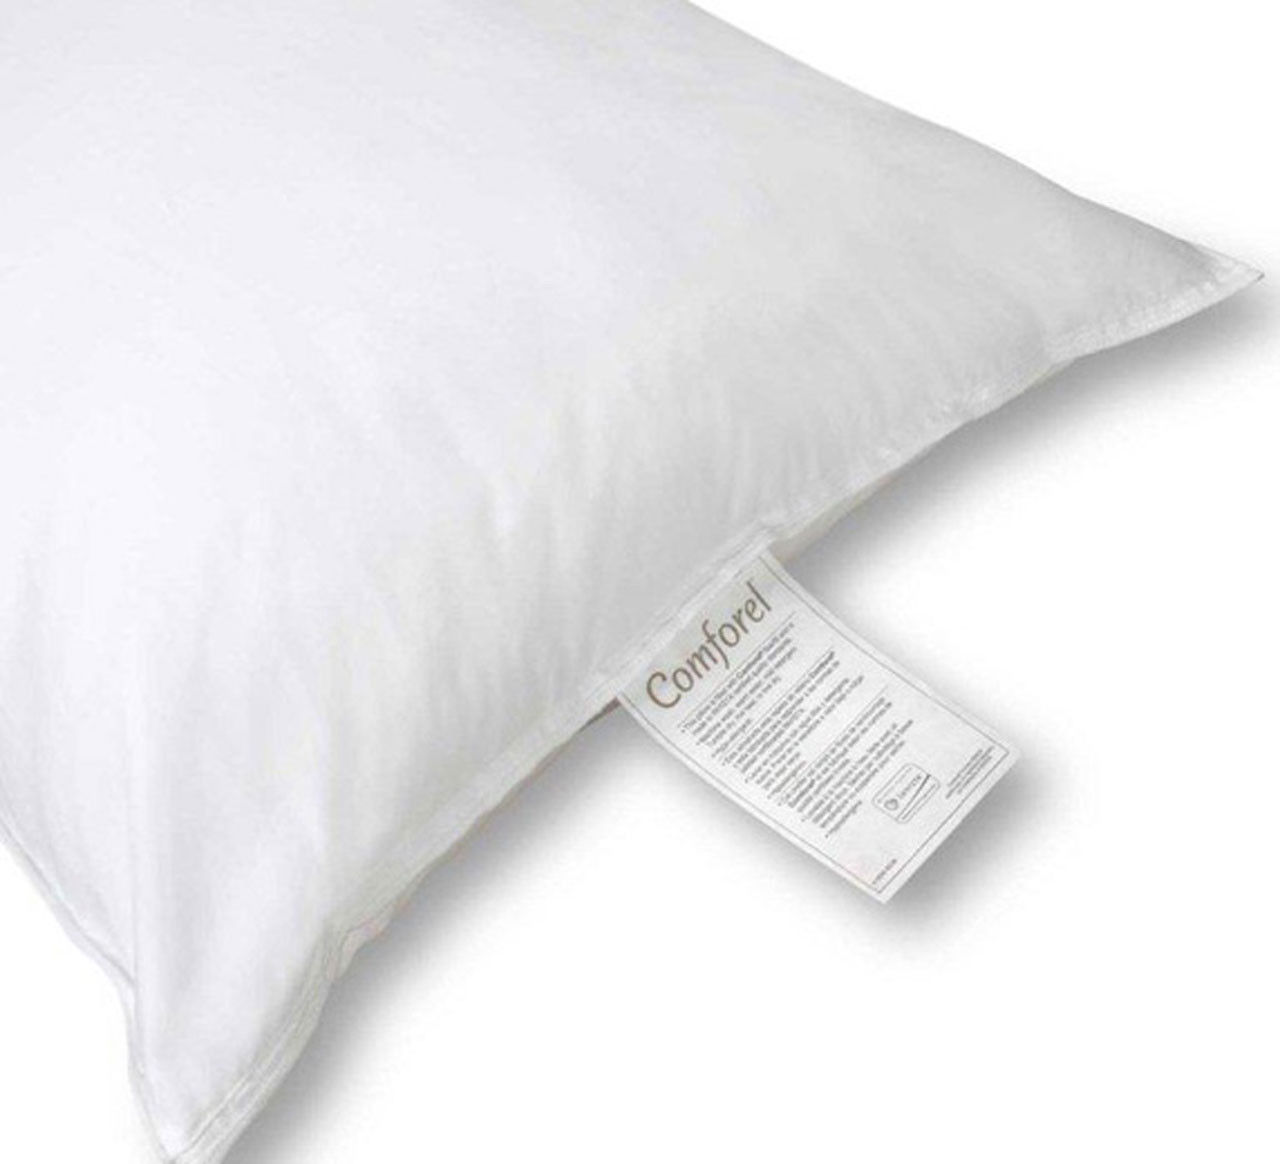 What are the available sizes for Comforel® pillows?